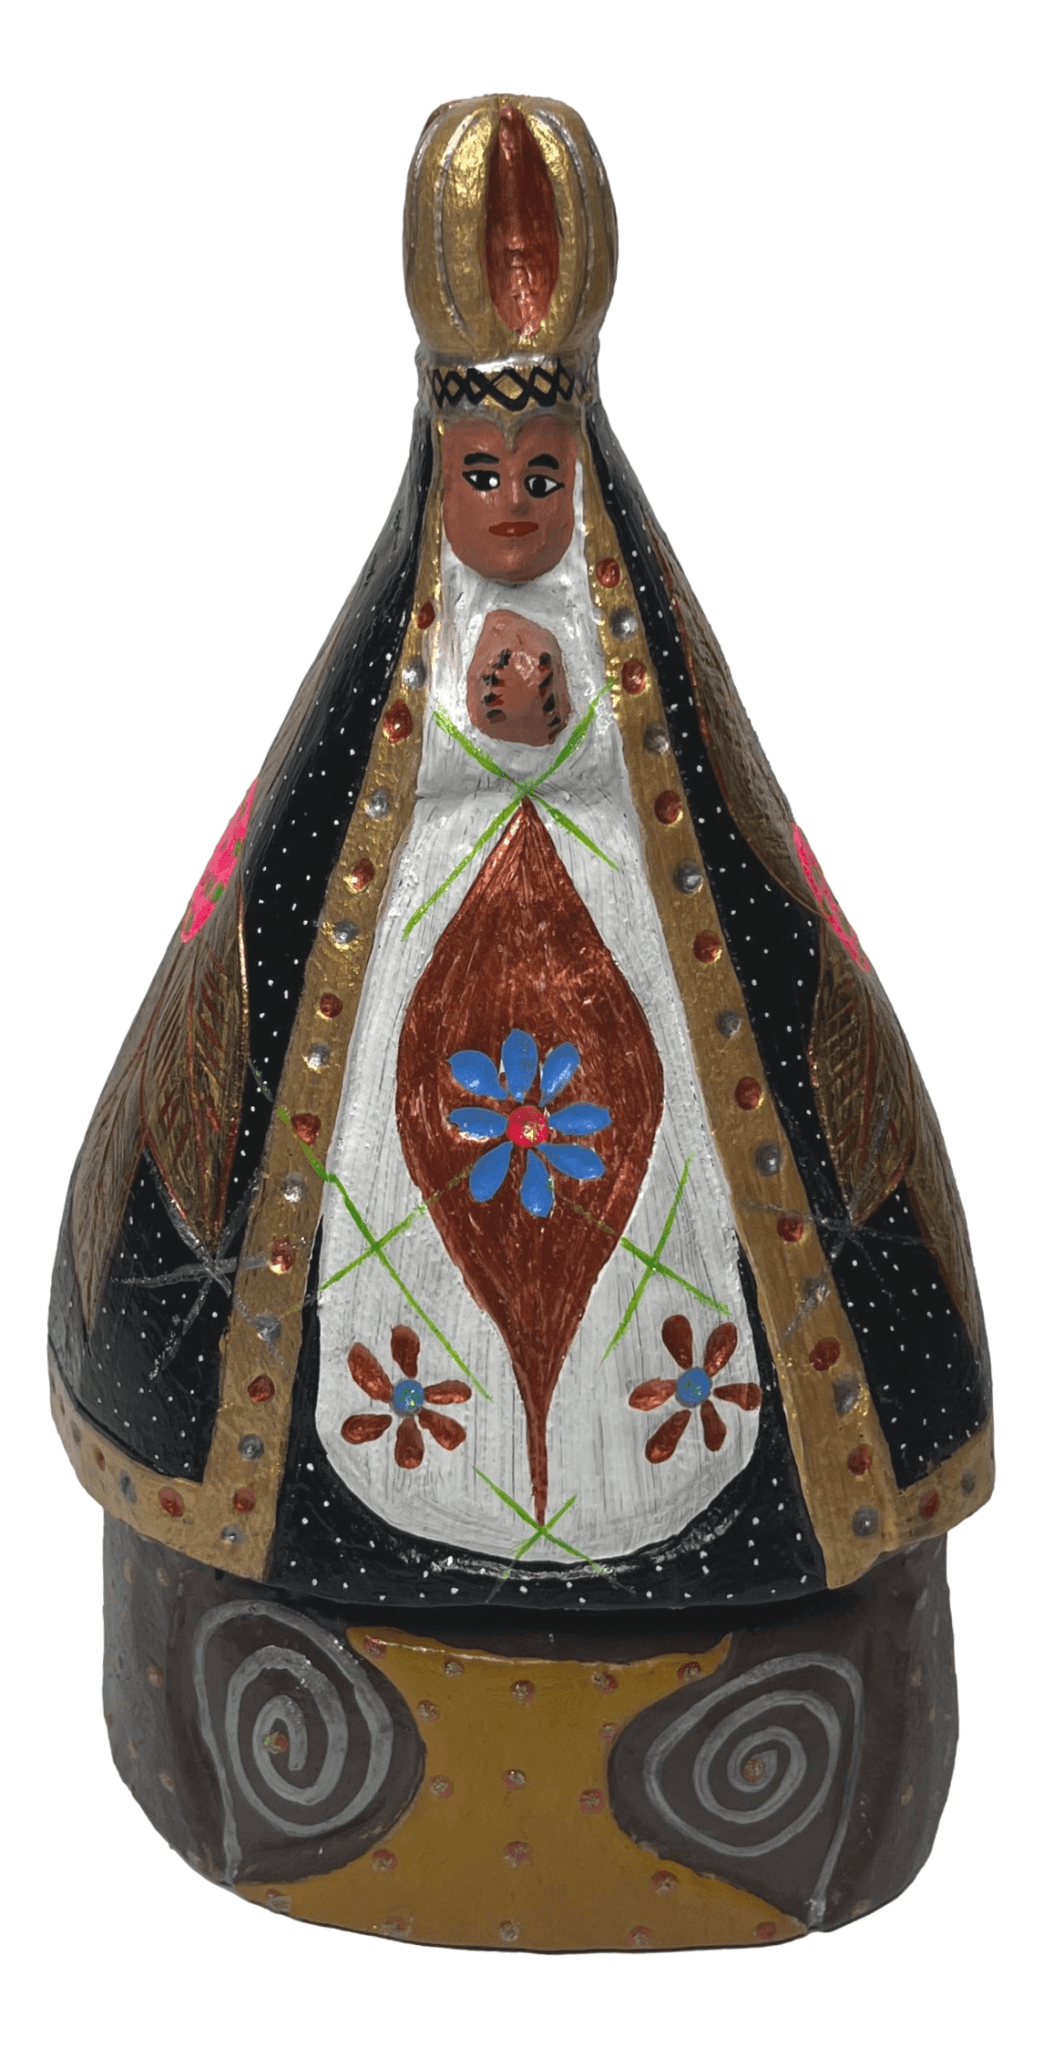 Statue Nuestra Senora Wood Handcrafted By Armando Carrillo Arrazola In Oaxaca Mexico H: 9.5 inches X W: 5.5 inches - Ysleta Mission Gift Shop- VOTED El Paso's Best Gift Shop